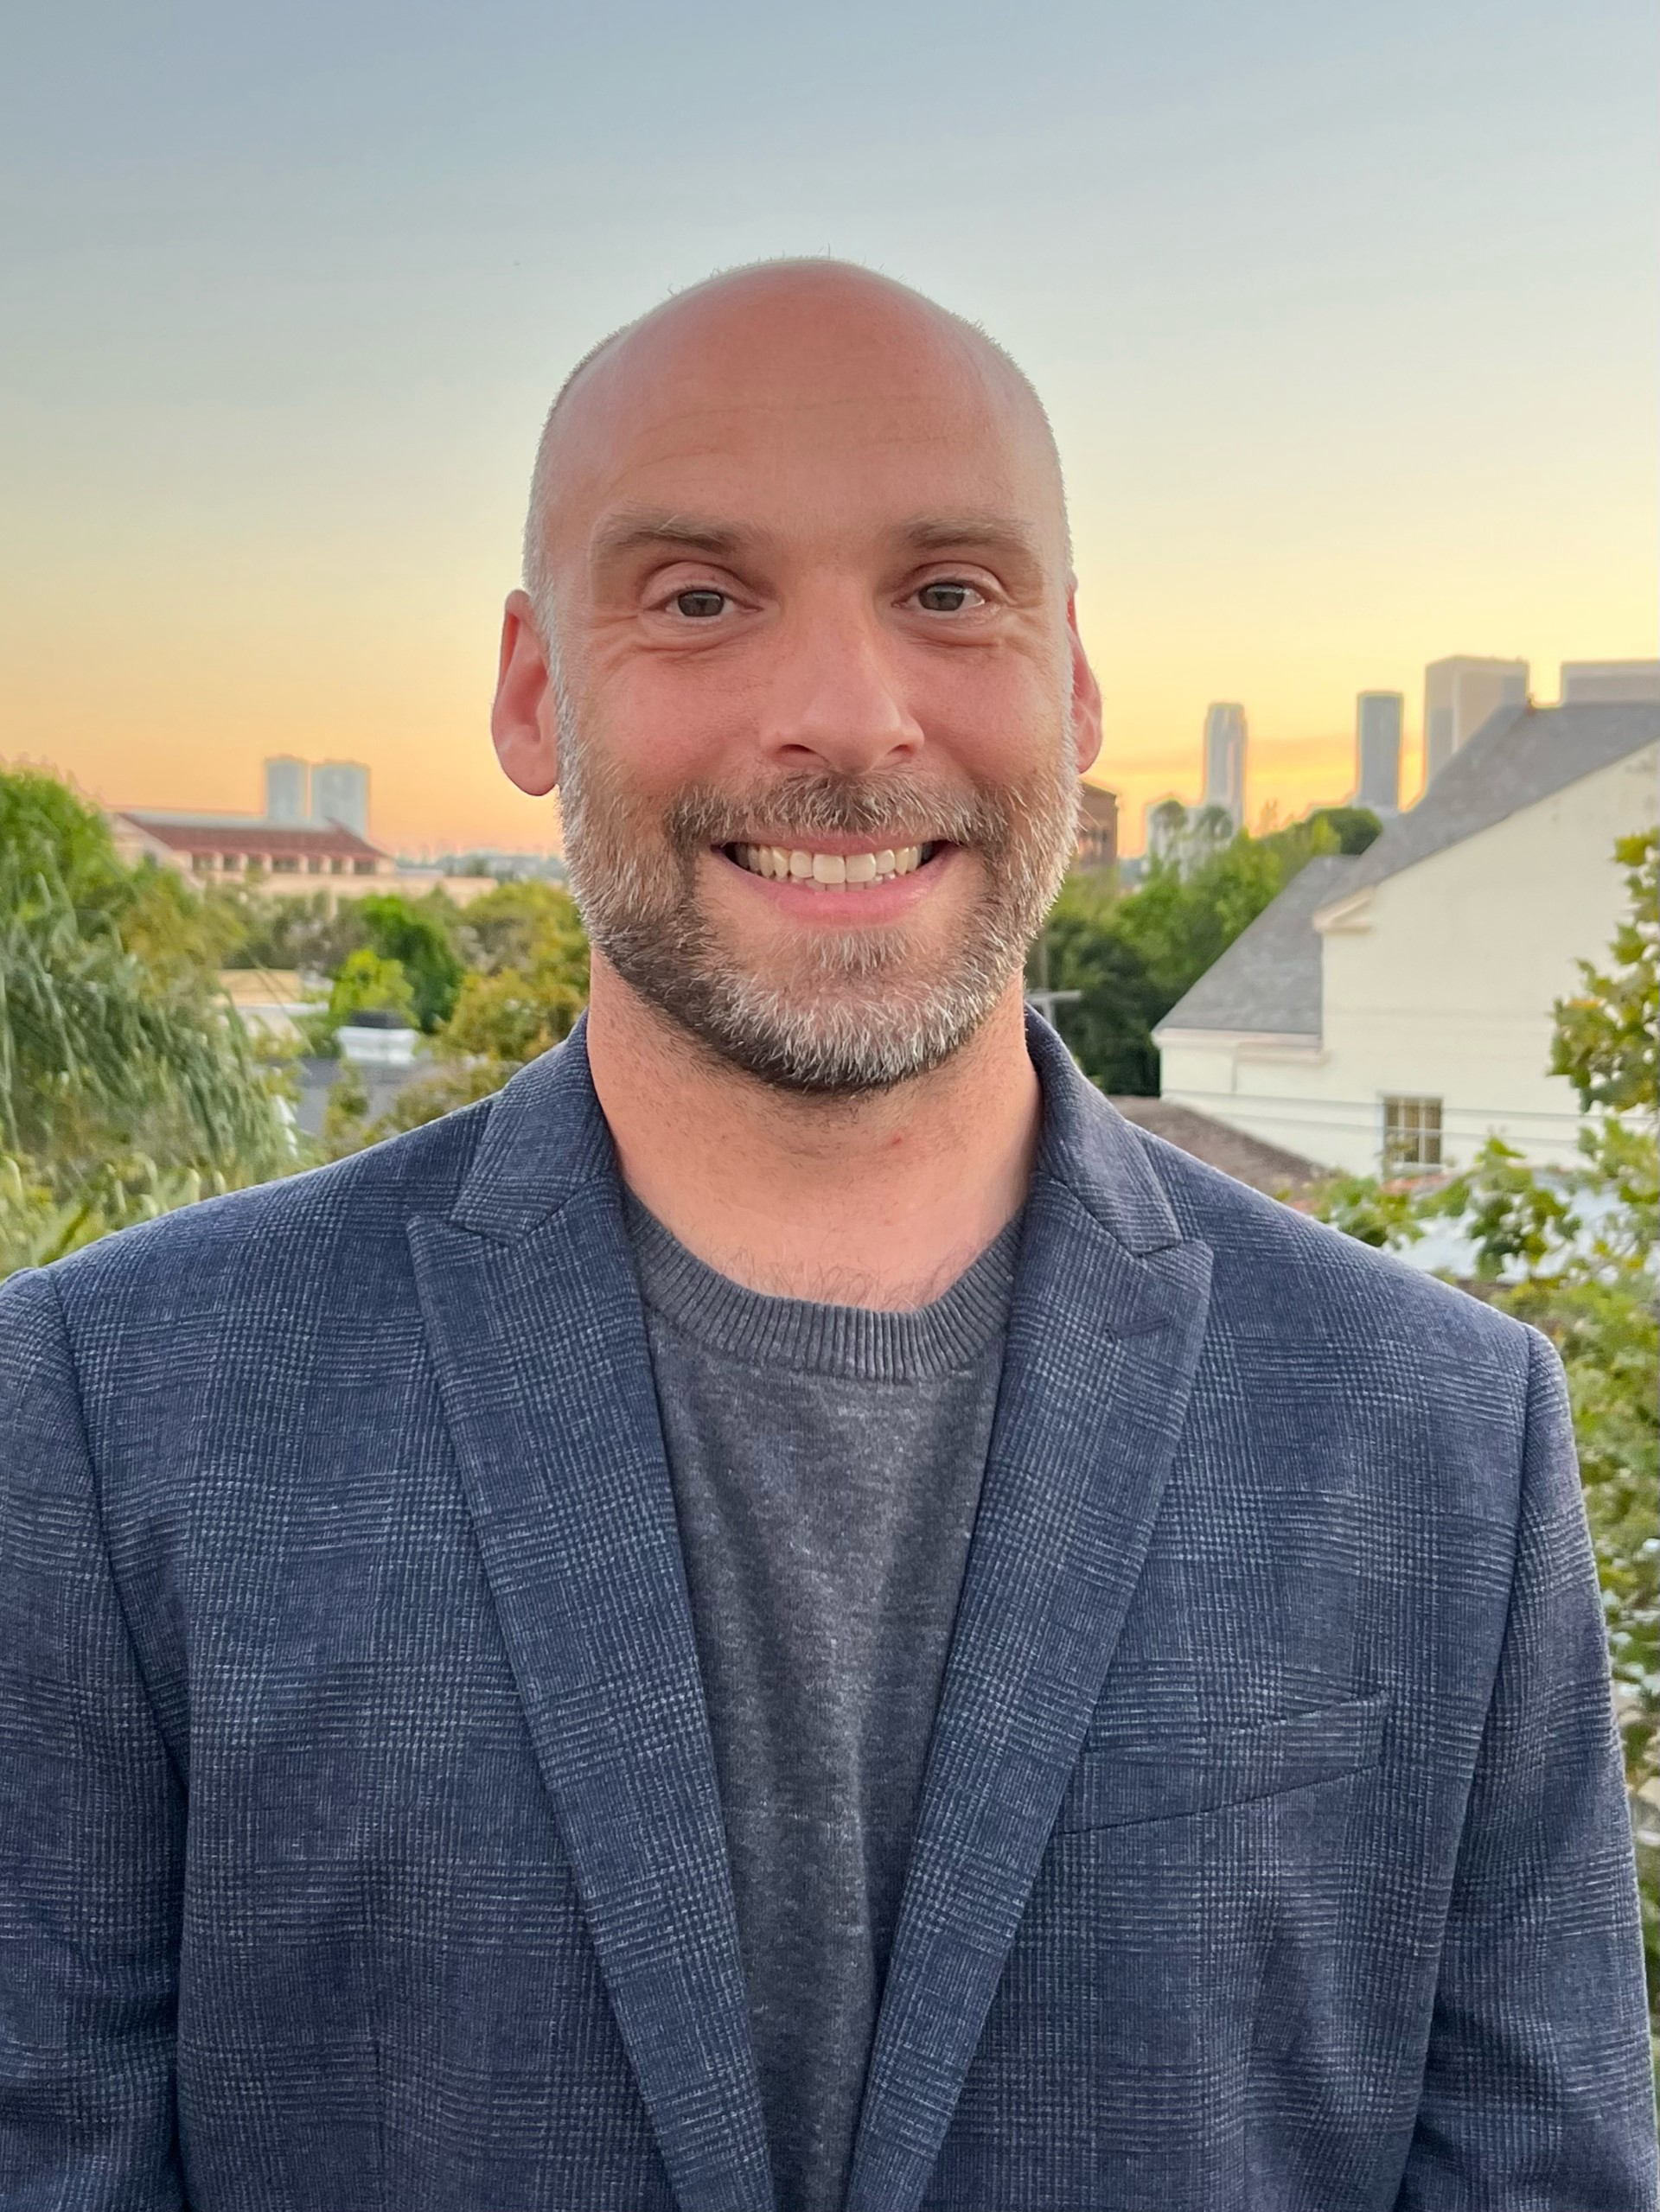 A white passing, cis, man; with a shaved head, and a trimmed, dark brown and gray beard, is smiling. He is wearing a Navy sports jacket with a gray sweater underneath it. The subject stands in front of a cityscape revealing the tops of trees with green leaves and gray shingled roofs of houses. In the far distance, skyscrapers rest against the horizon as the setting sun illuminates the sky with a pale blue, yellow, and orange.